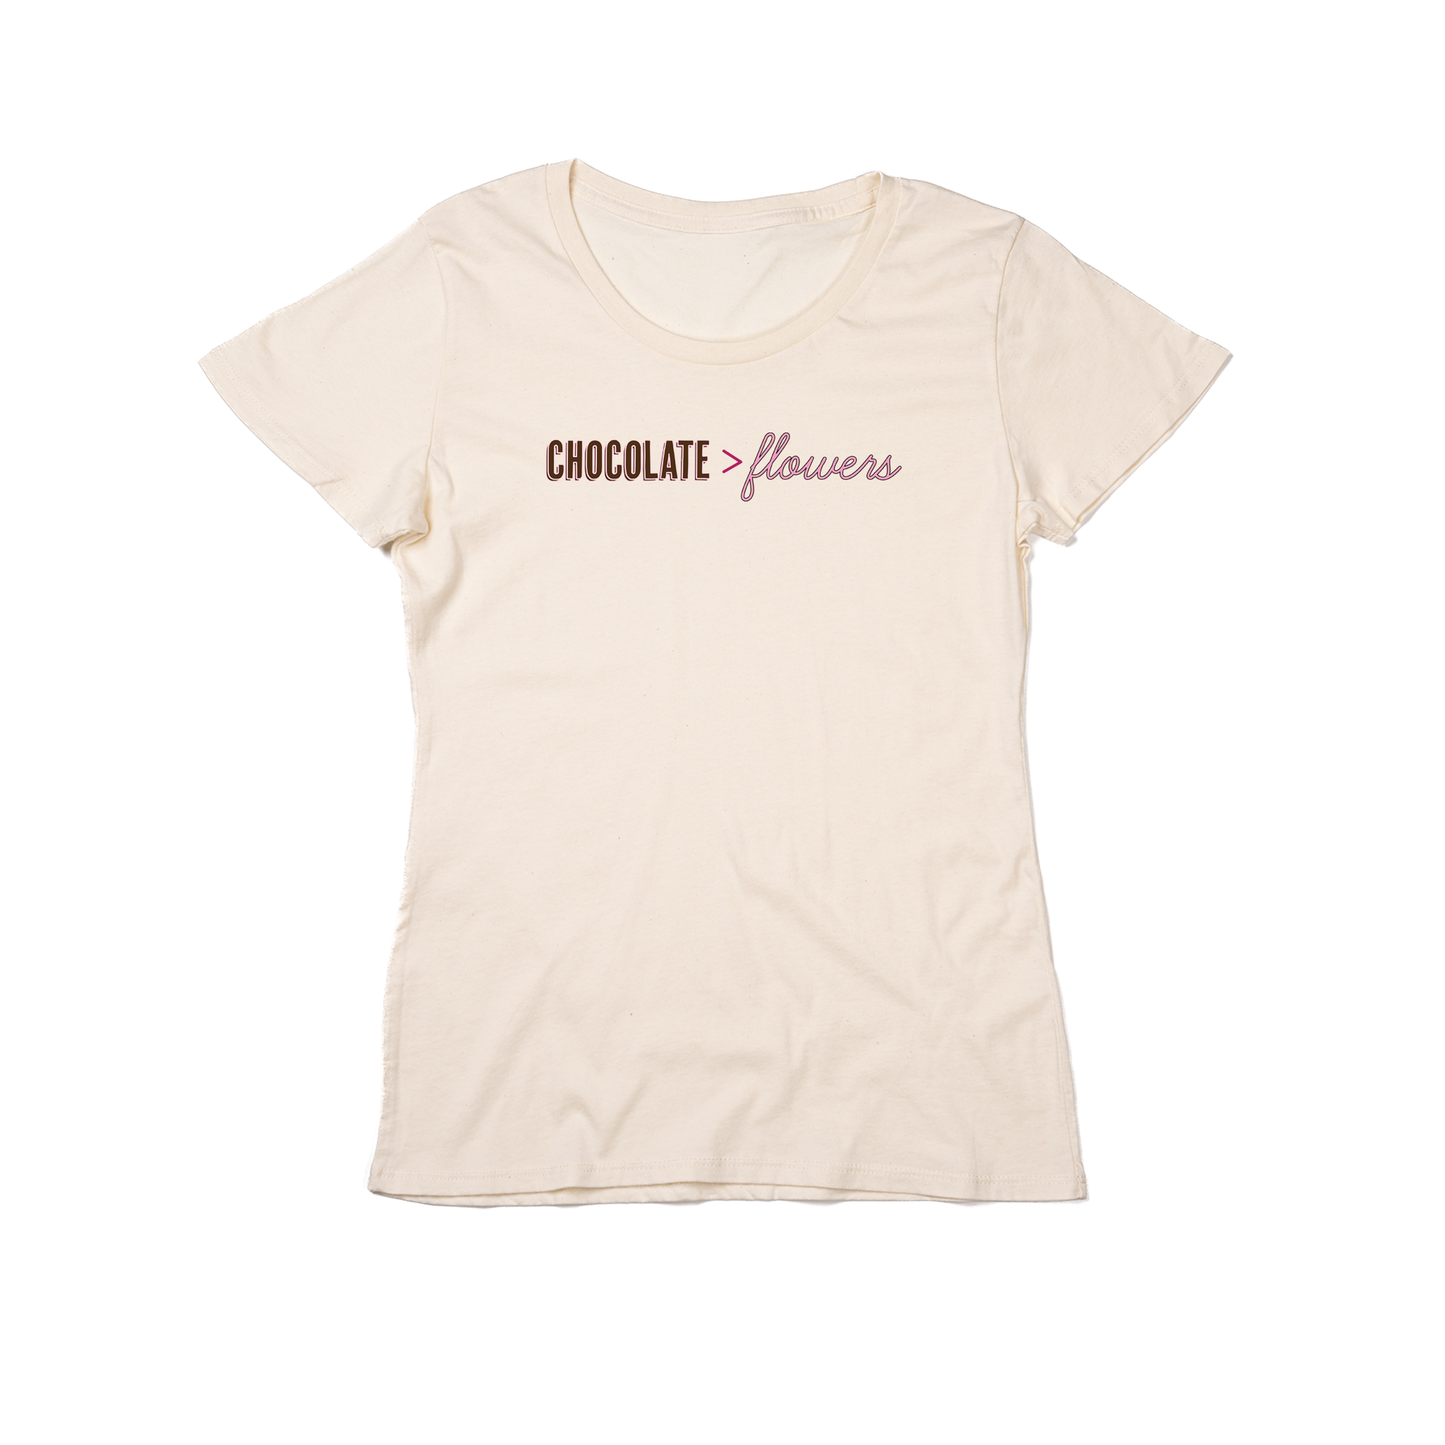 Chocolate > Flowers - Women's Fitted Tee (Natural)